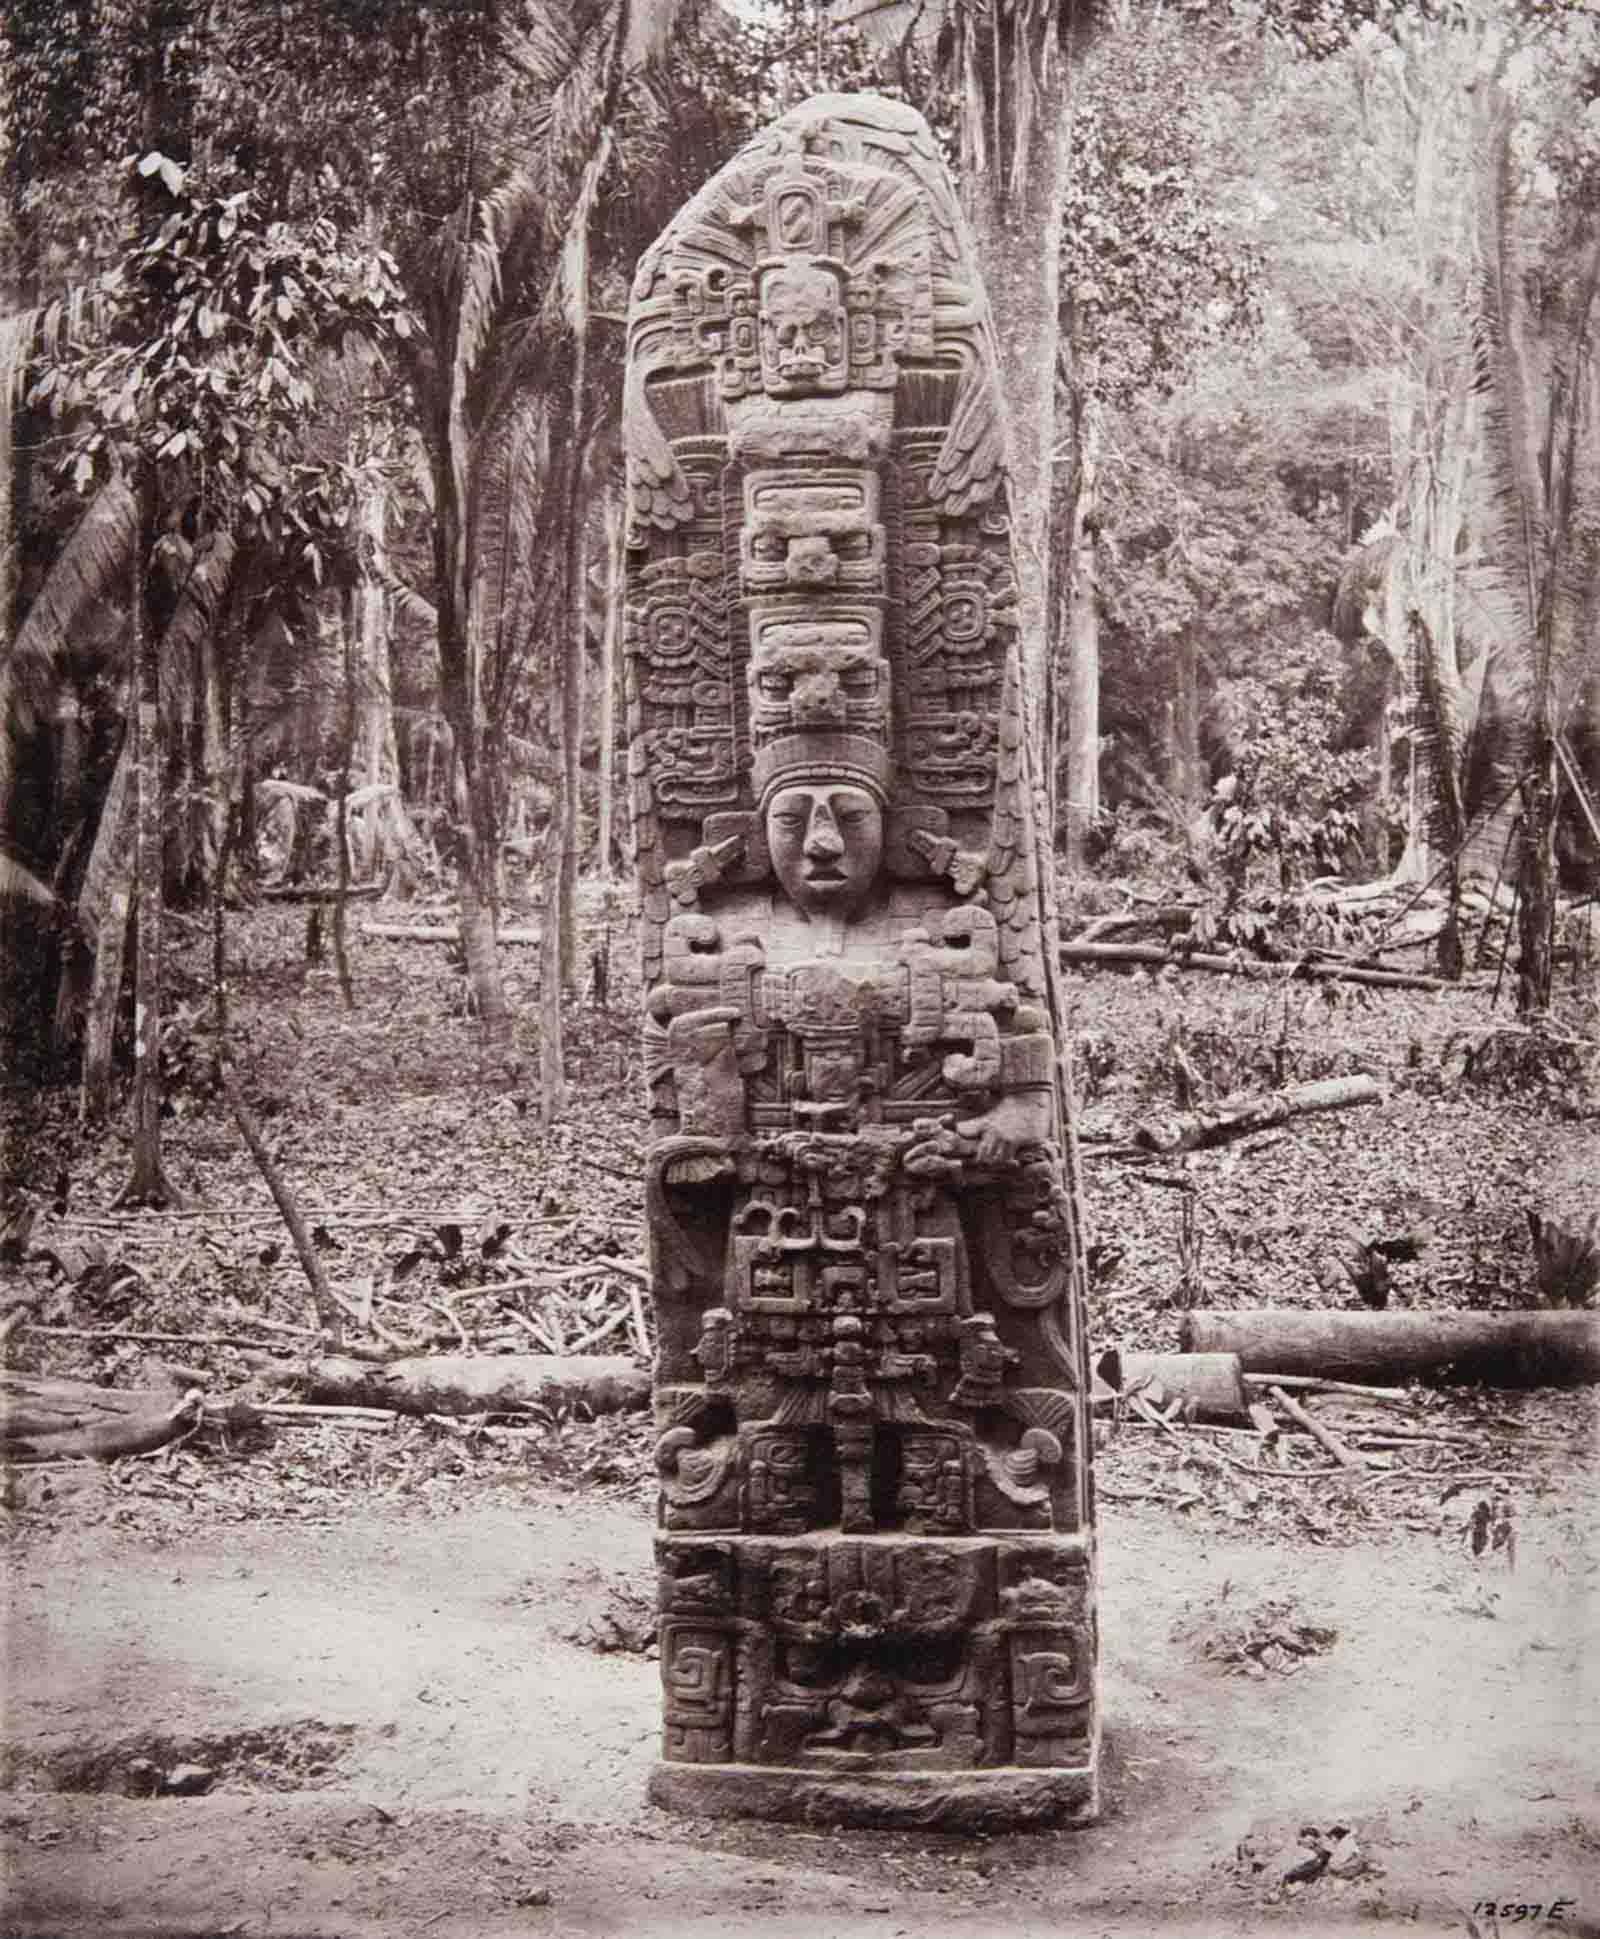 Stela D, dated AD 766. The figure depicted on the craving is that of K’ak’ Tiliw Chan Yopaat, ruler of Quirigua in the mid-eighth century.